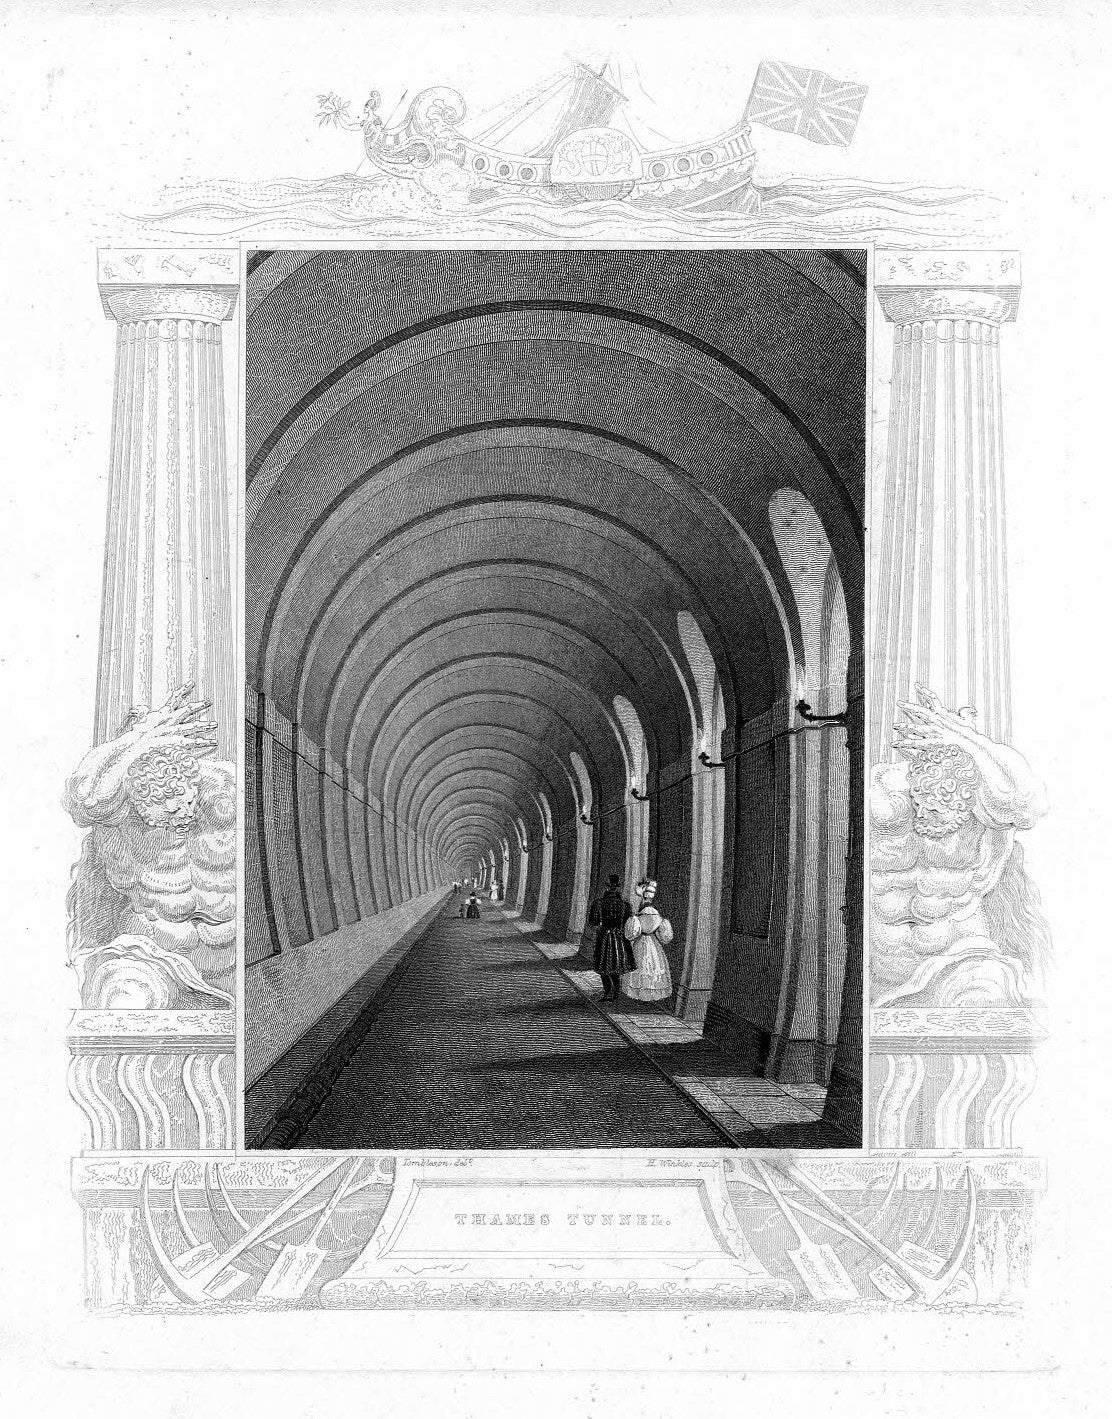 Thames Tunnel by Tombleson antique print 1838